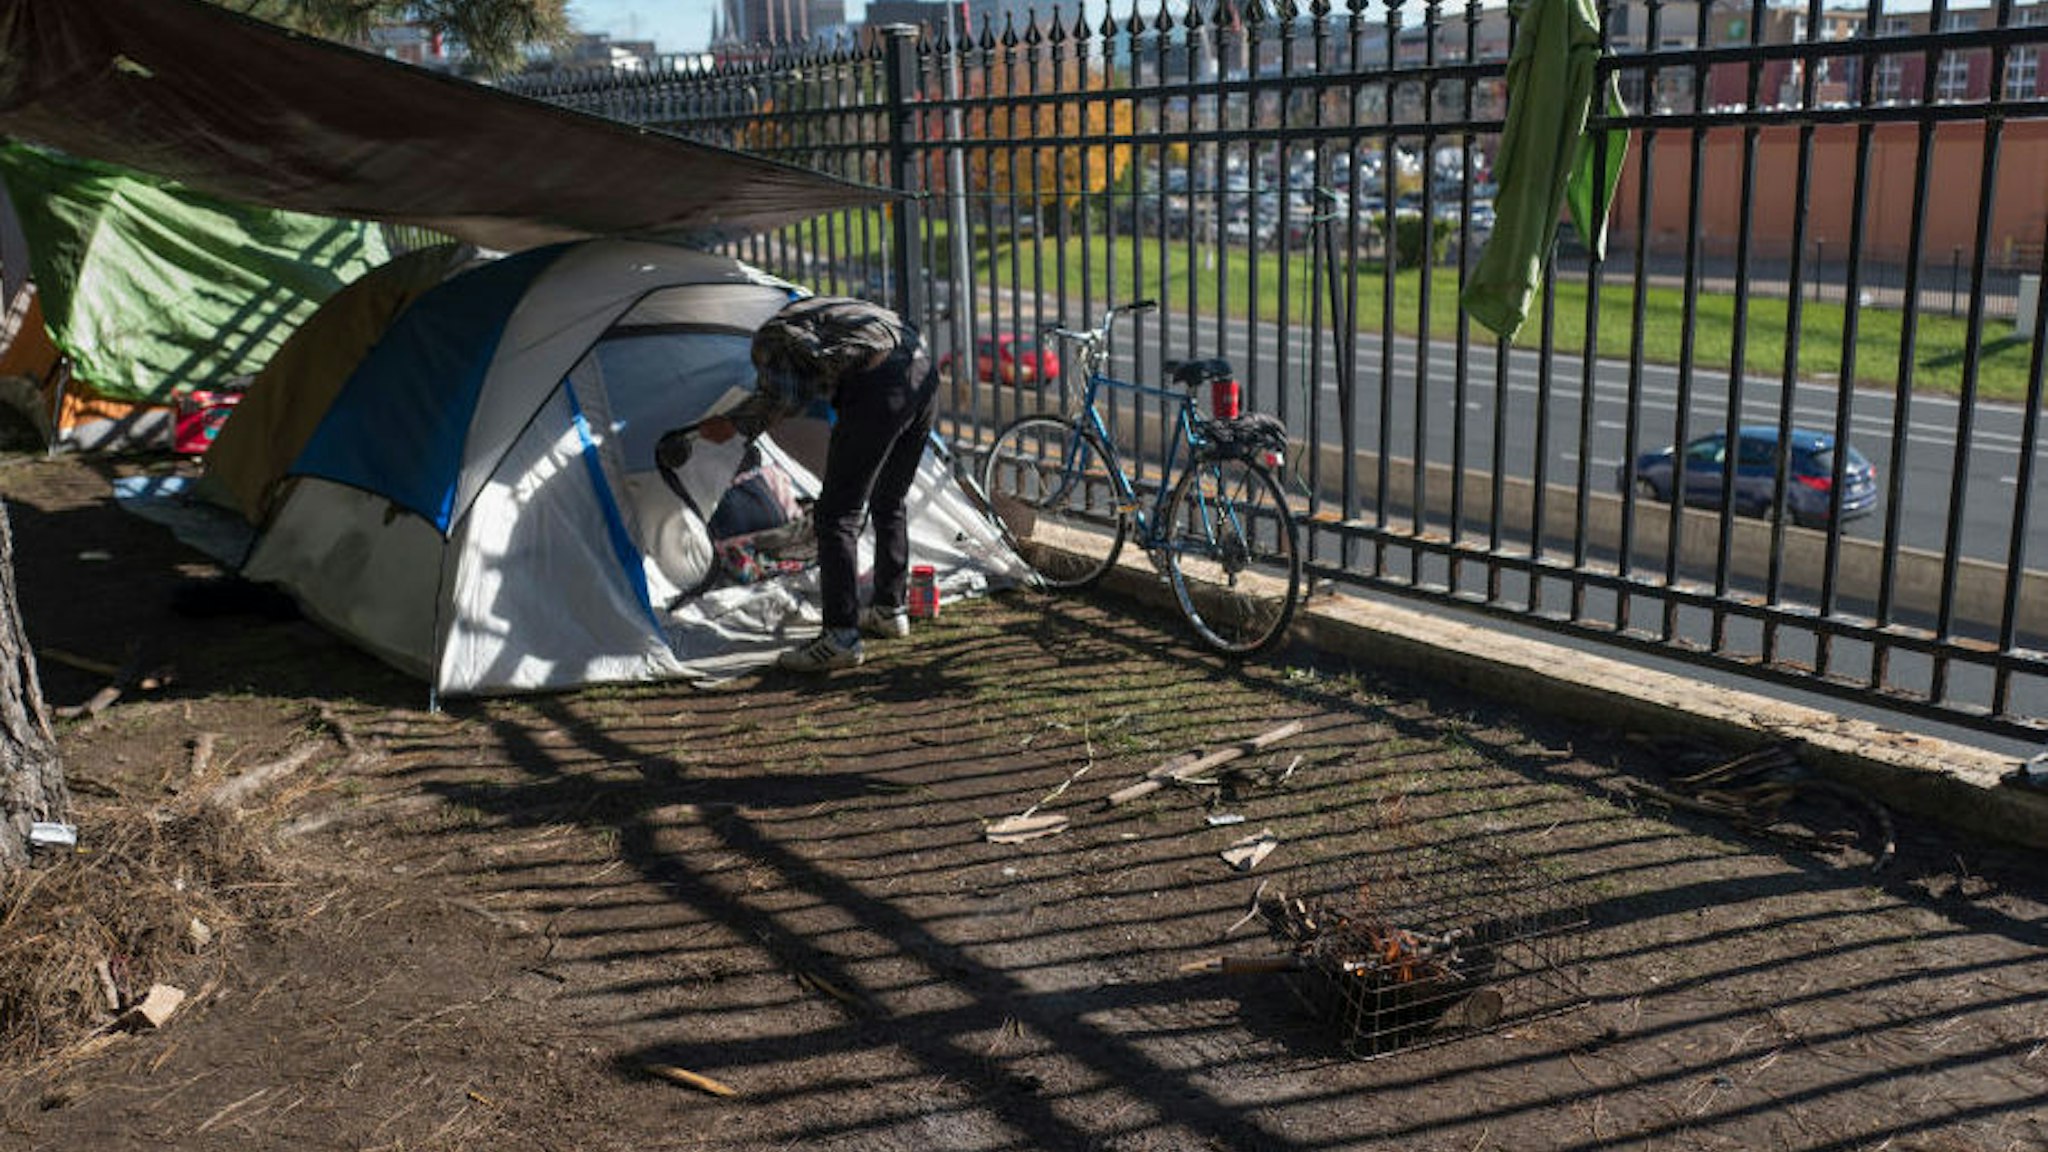 A homeless man who did not want his named used made coffee near his tent at the homeless encampment